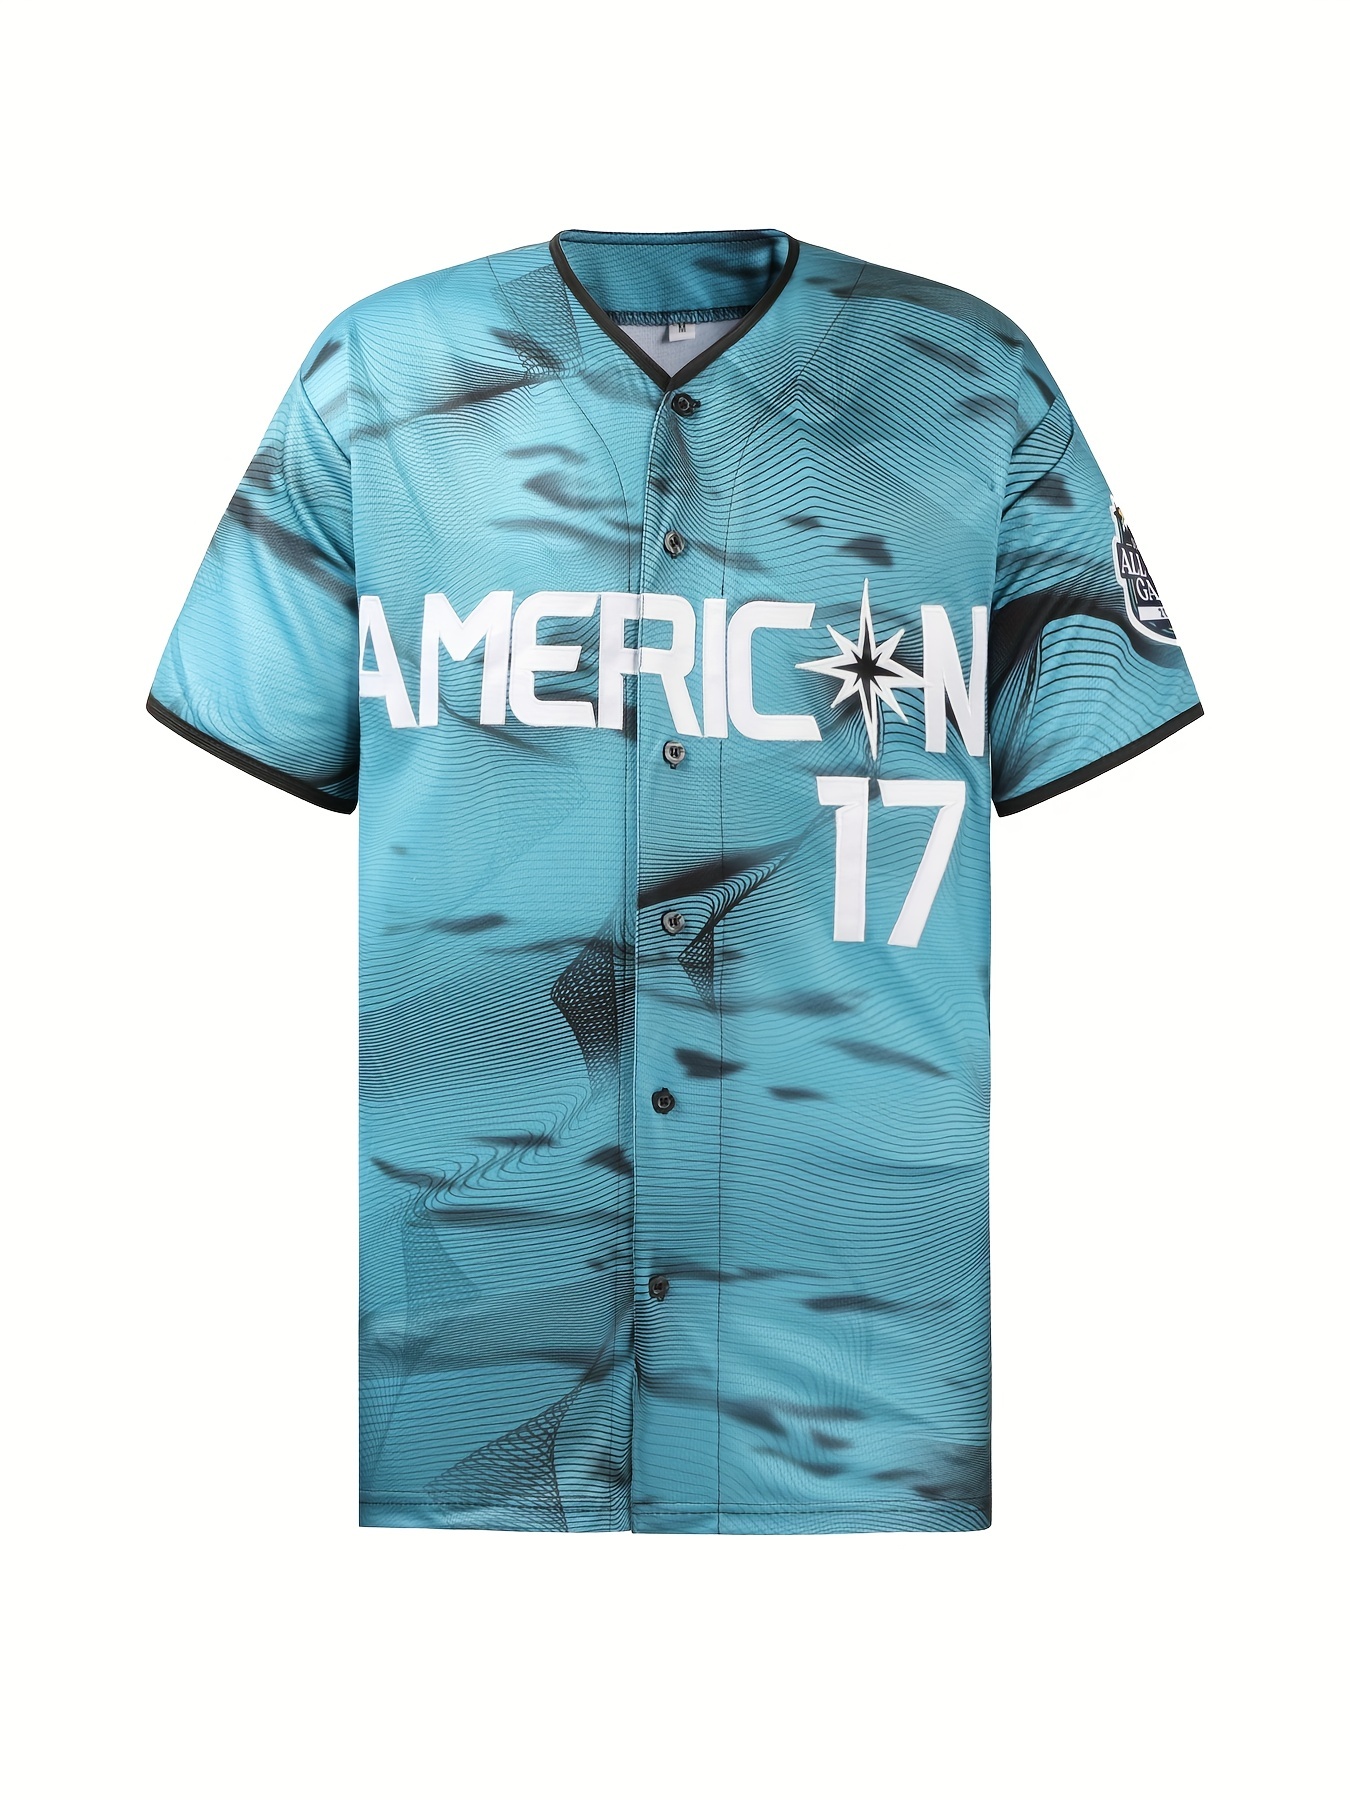 Men's Classic Design Mexico #56 Baseball Jersey, Retro Baseball Shirt, Slightly Stretch Breathable Embroidery Button Up Sports Uniform for Training